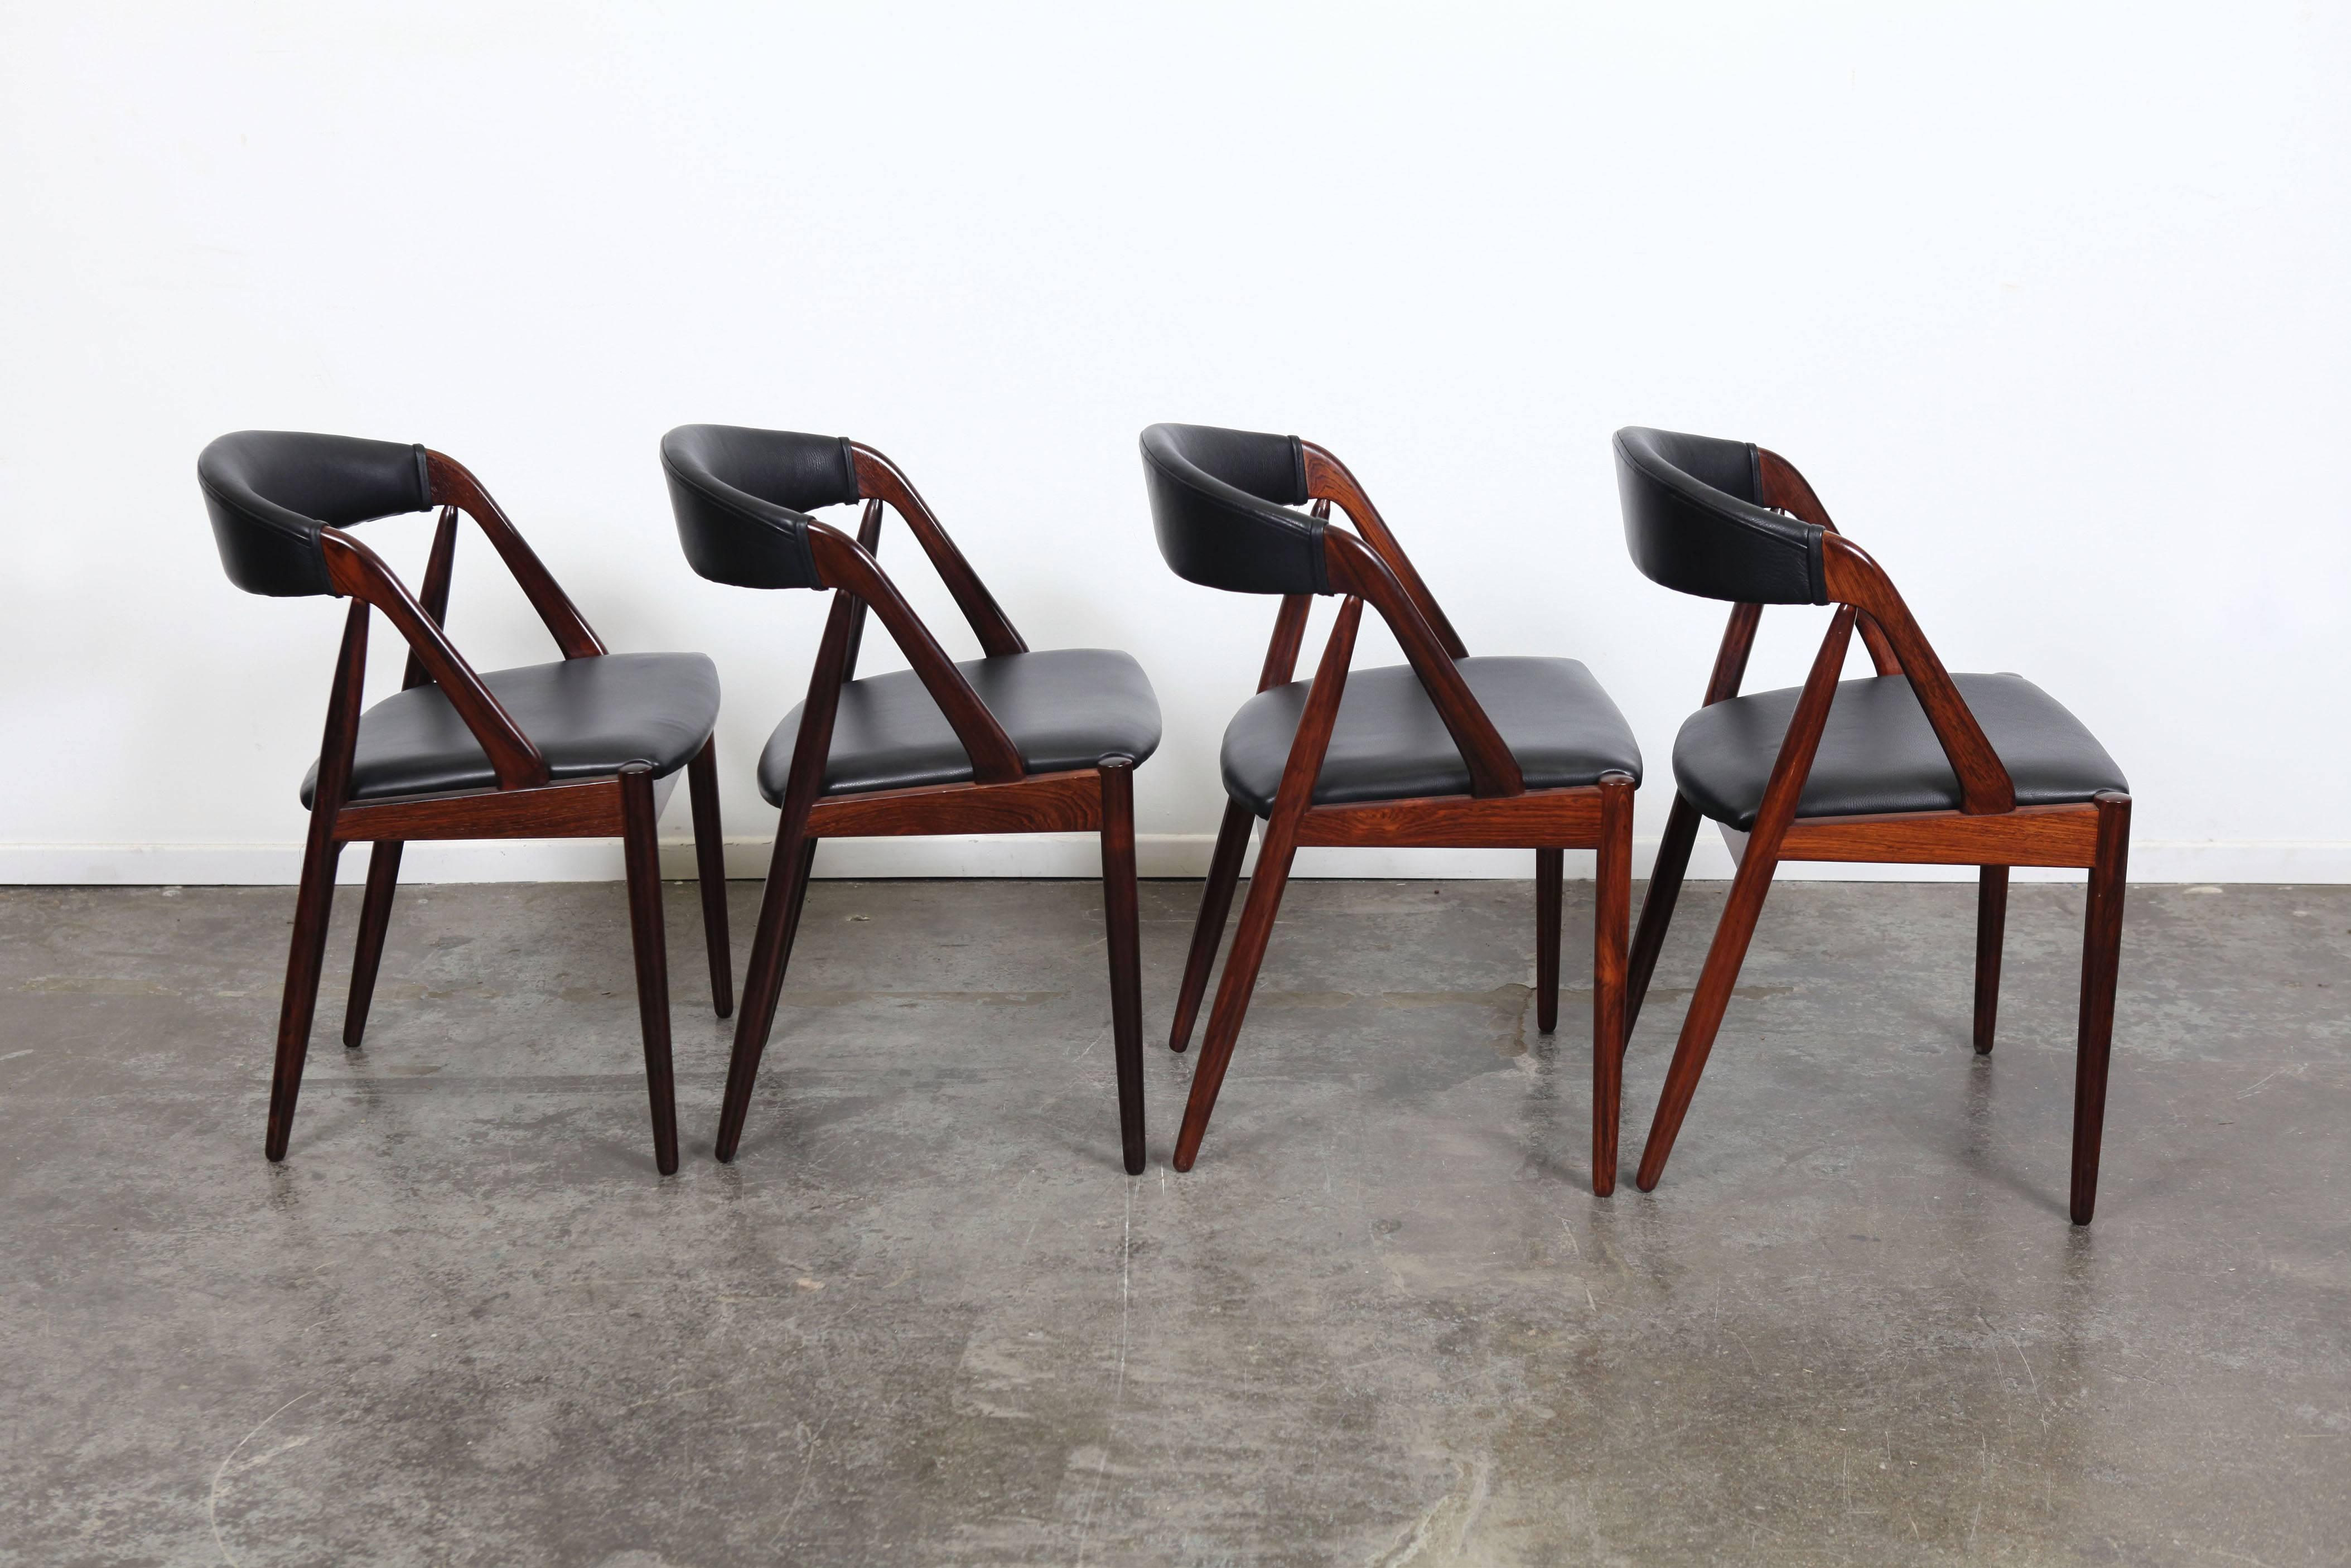 Set of four Danish Rosewood Kai Kristiansen Mid-Century dining chairs newly refinished in lacquer and newly upholstered in black leather.   These chairs feature vibrant wood grain and a softened angular design.